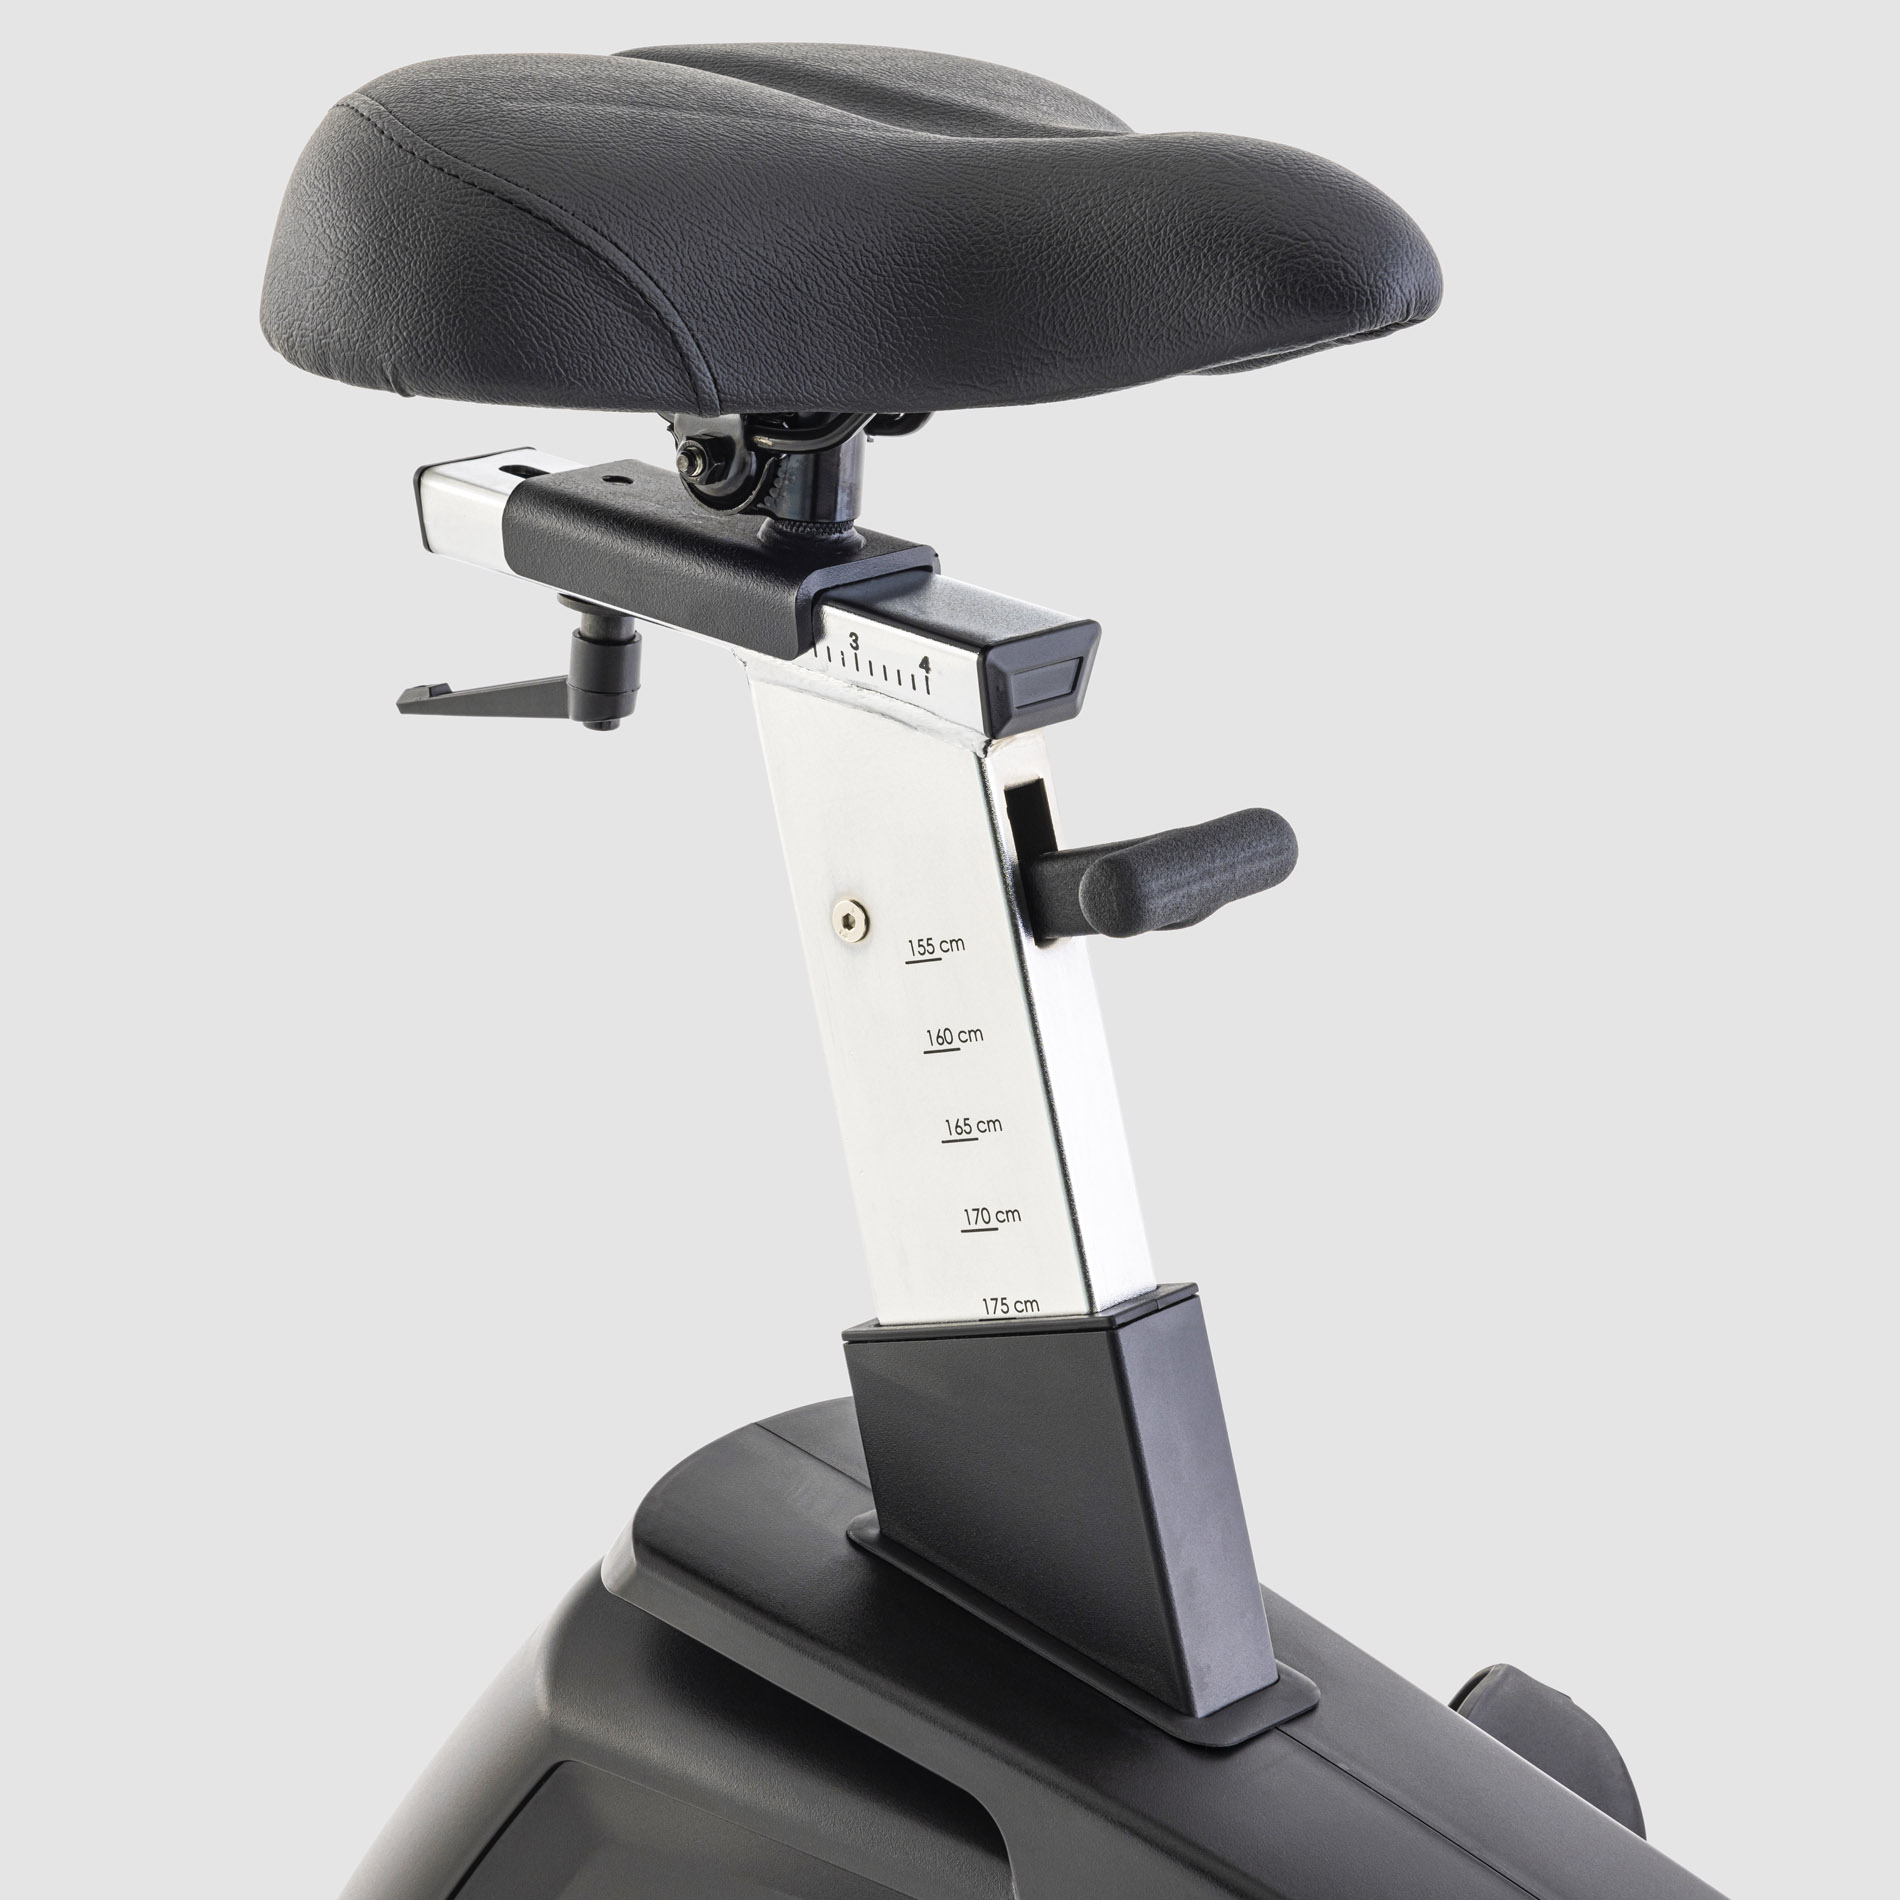 Horizontally and height-adjustable saddle for maximum seating comfort
